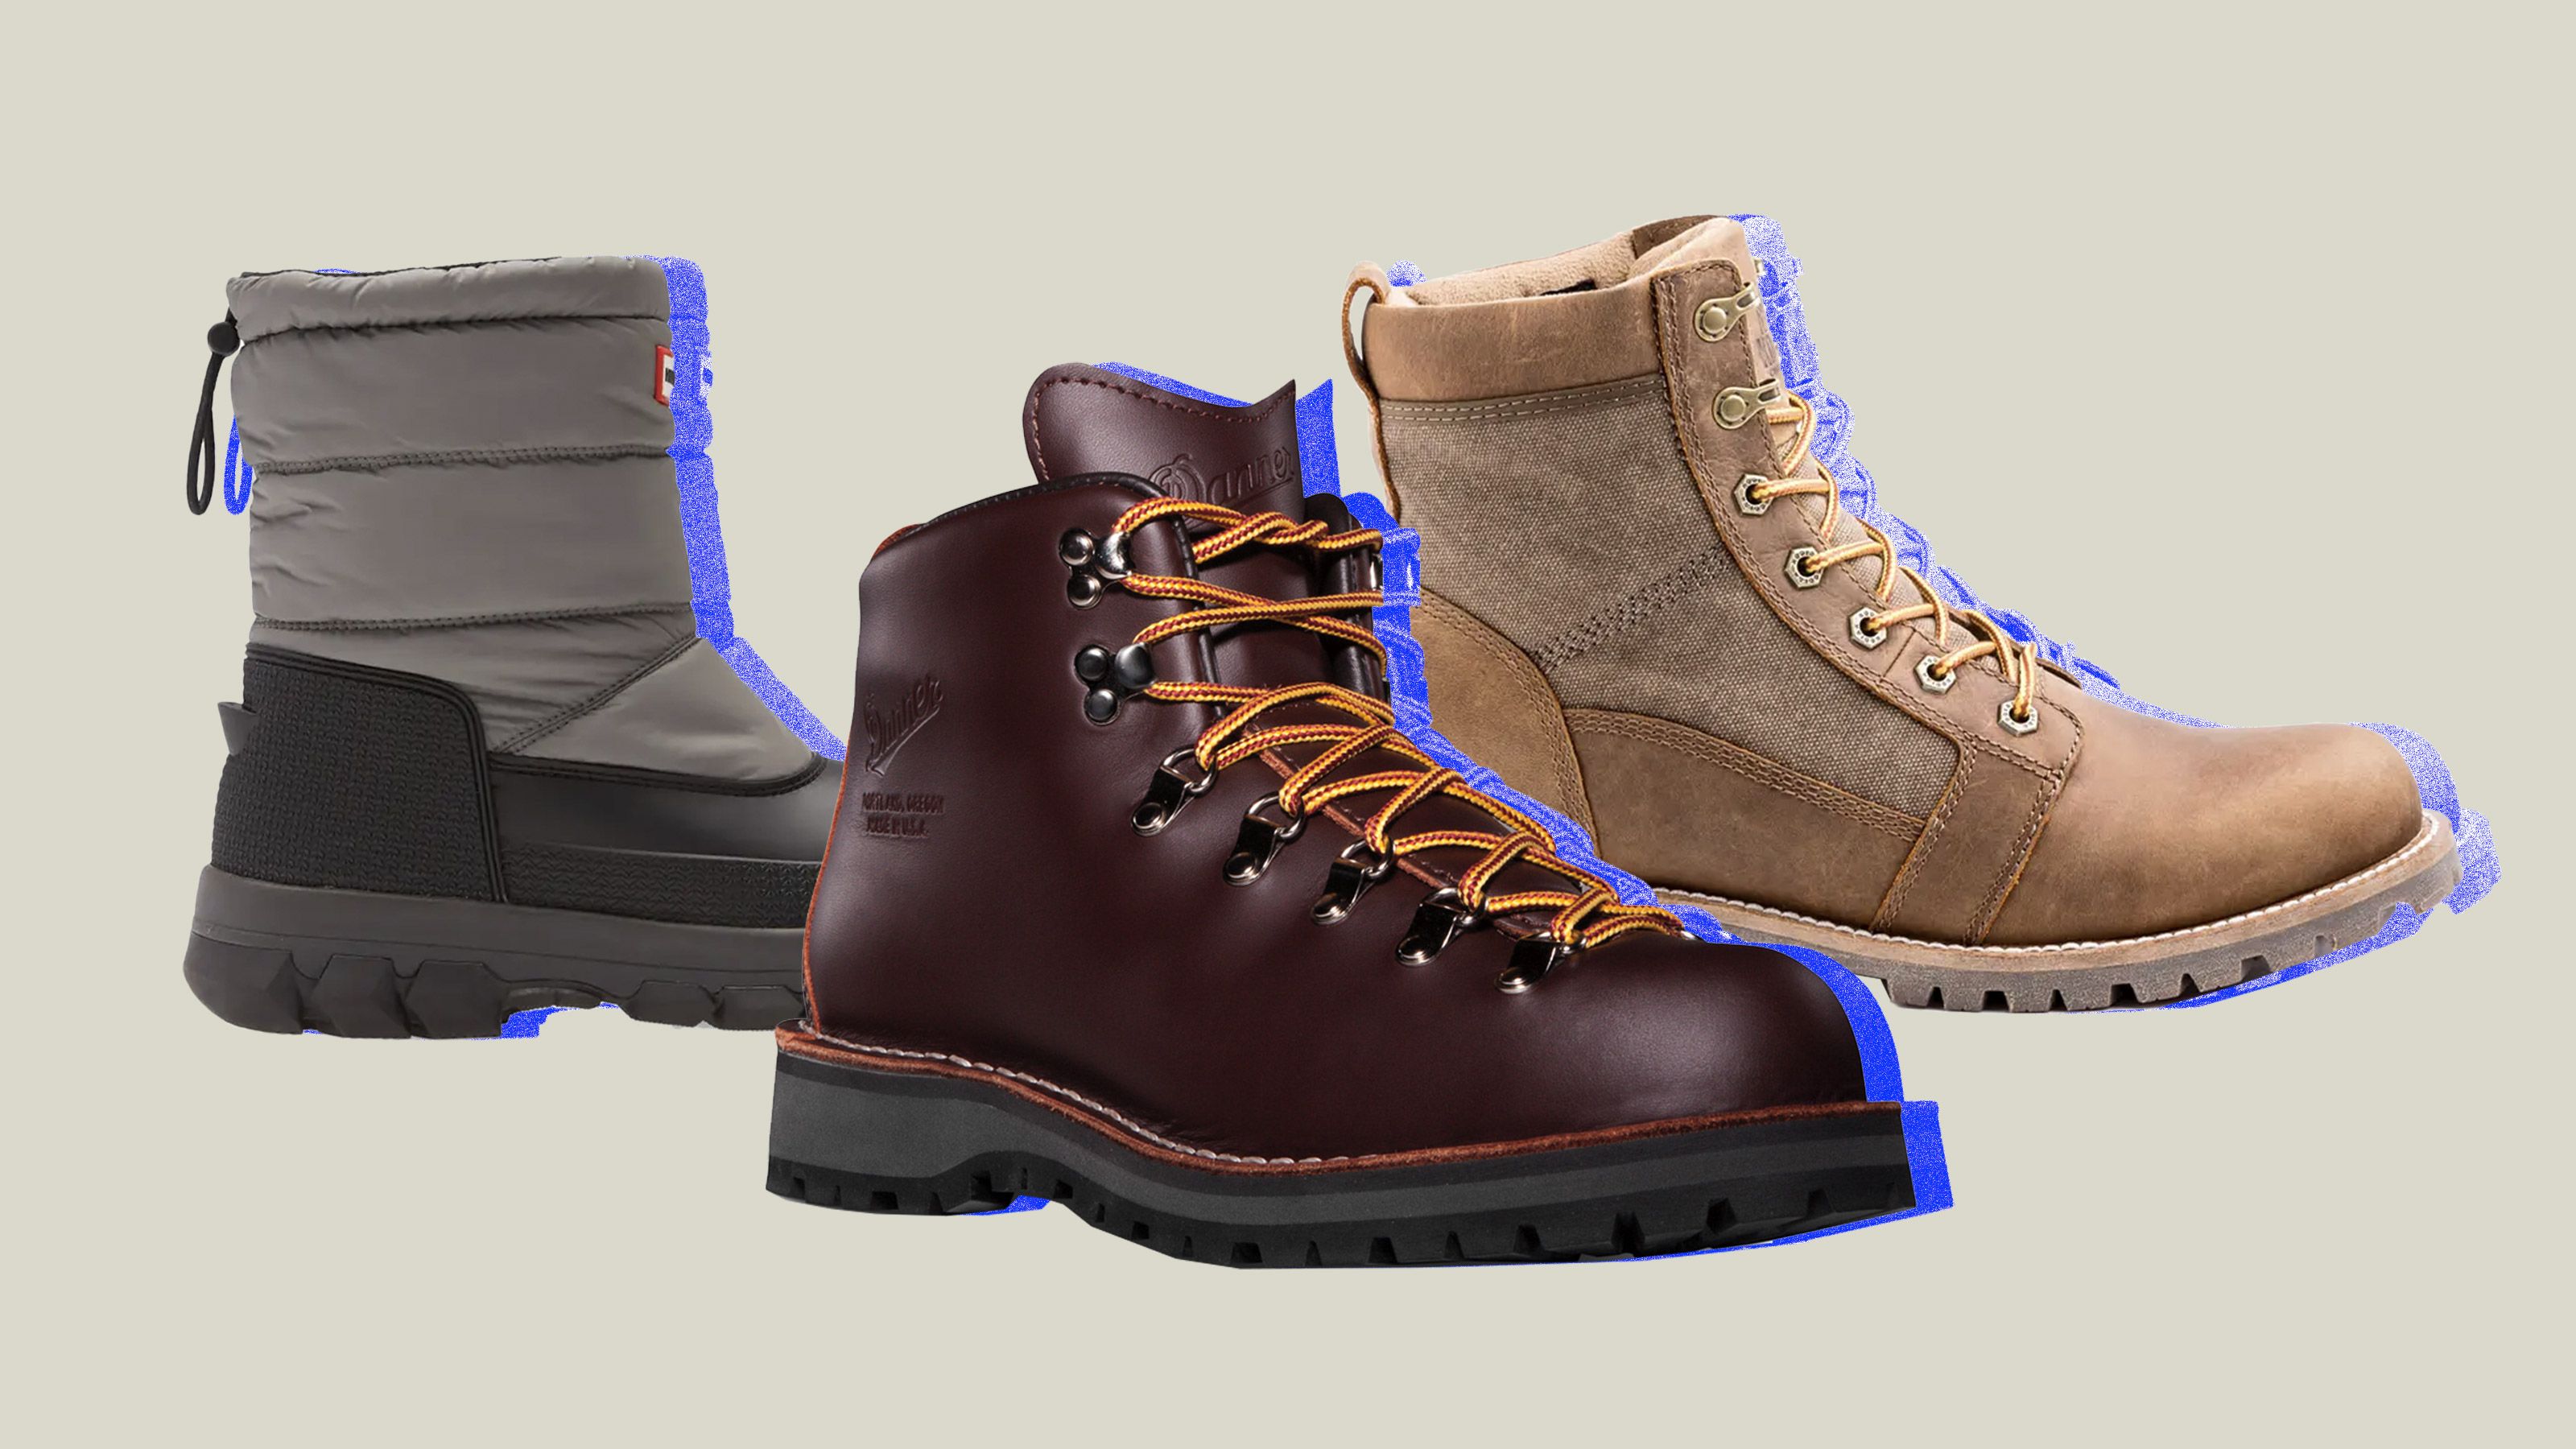 Great Snow Boots for Men